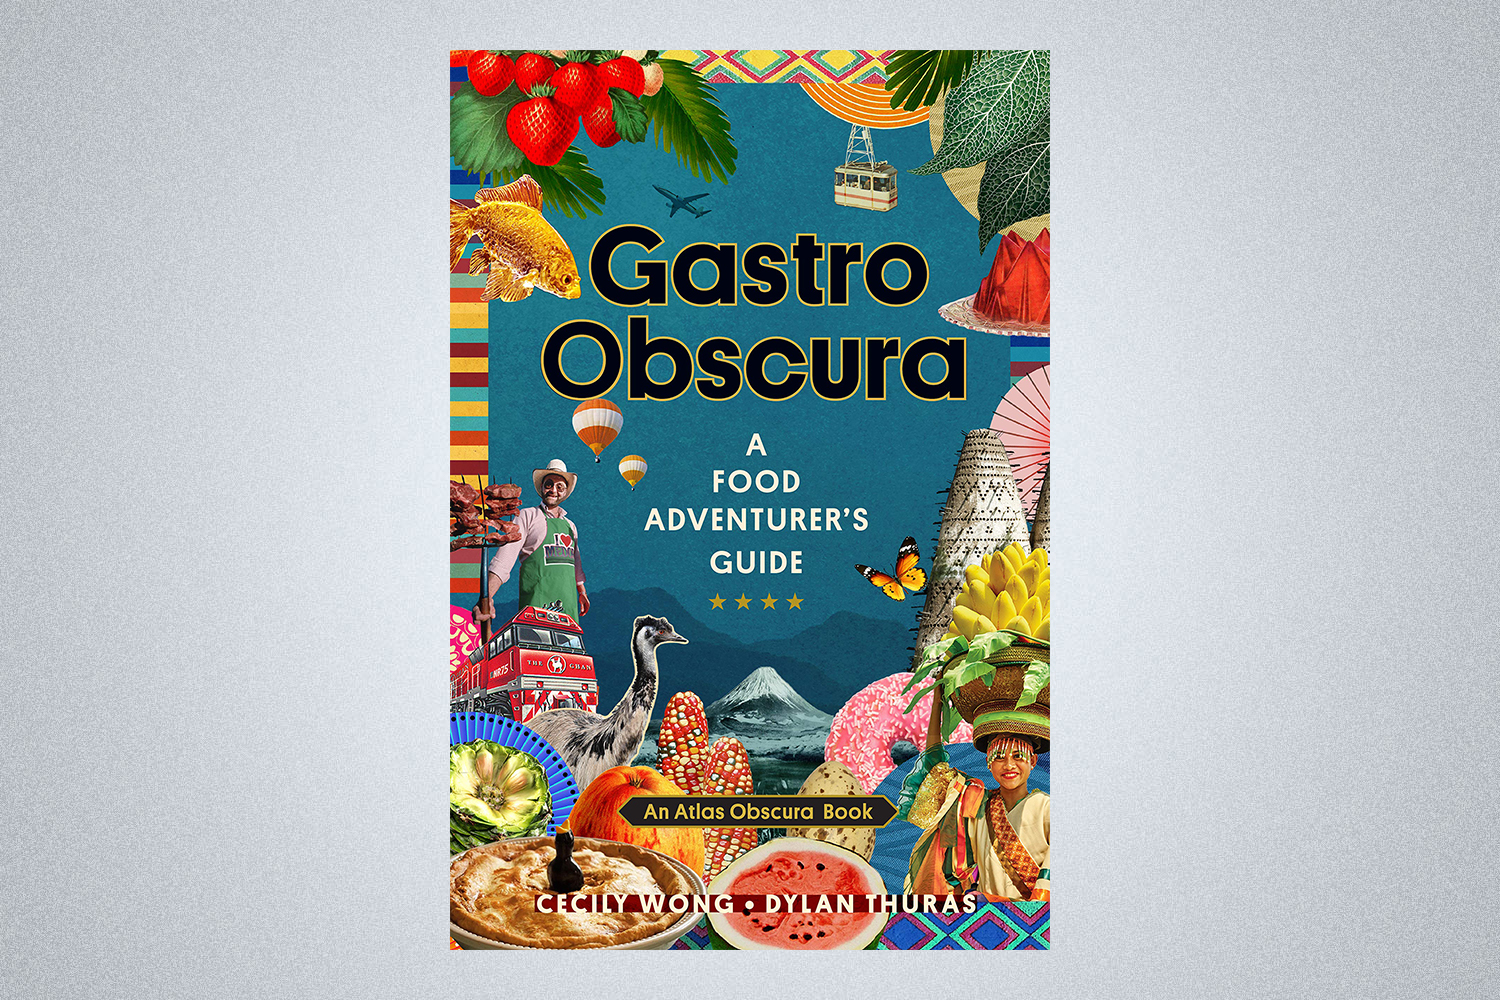 Gastro Obscura book by Cecily Wong and Dylan Thuras 